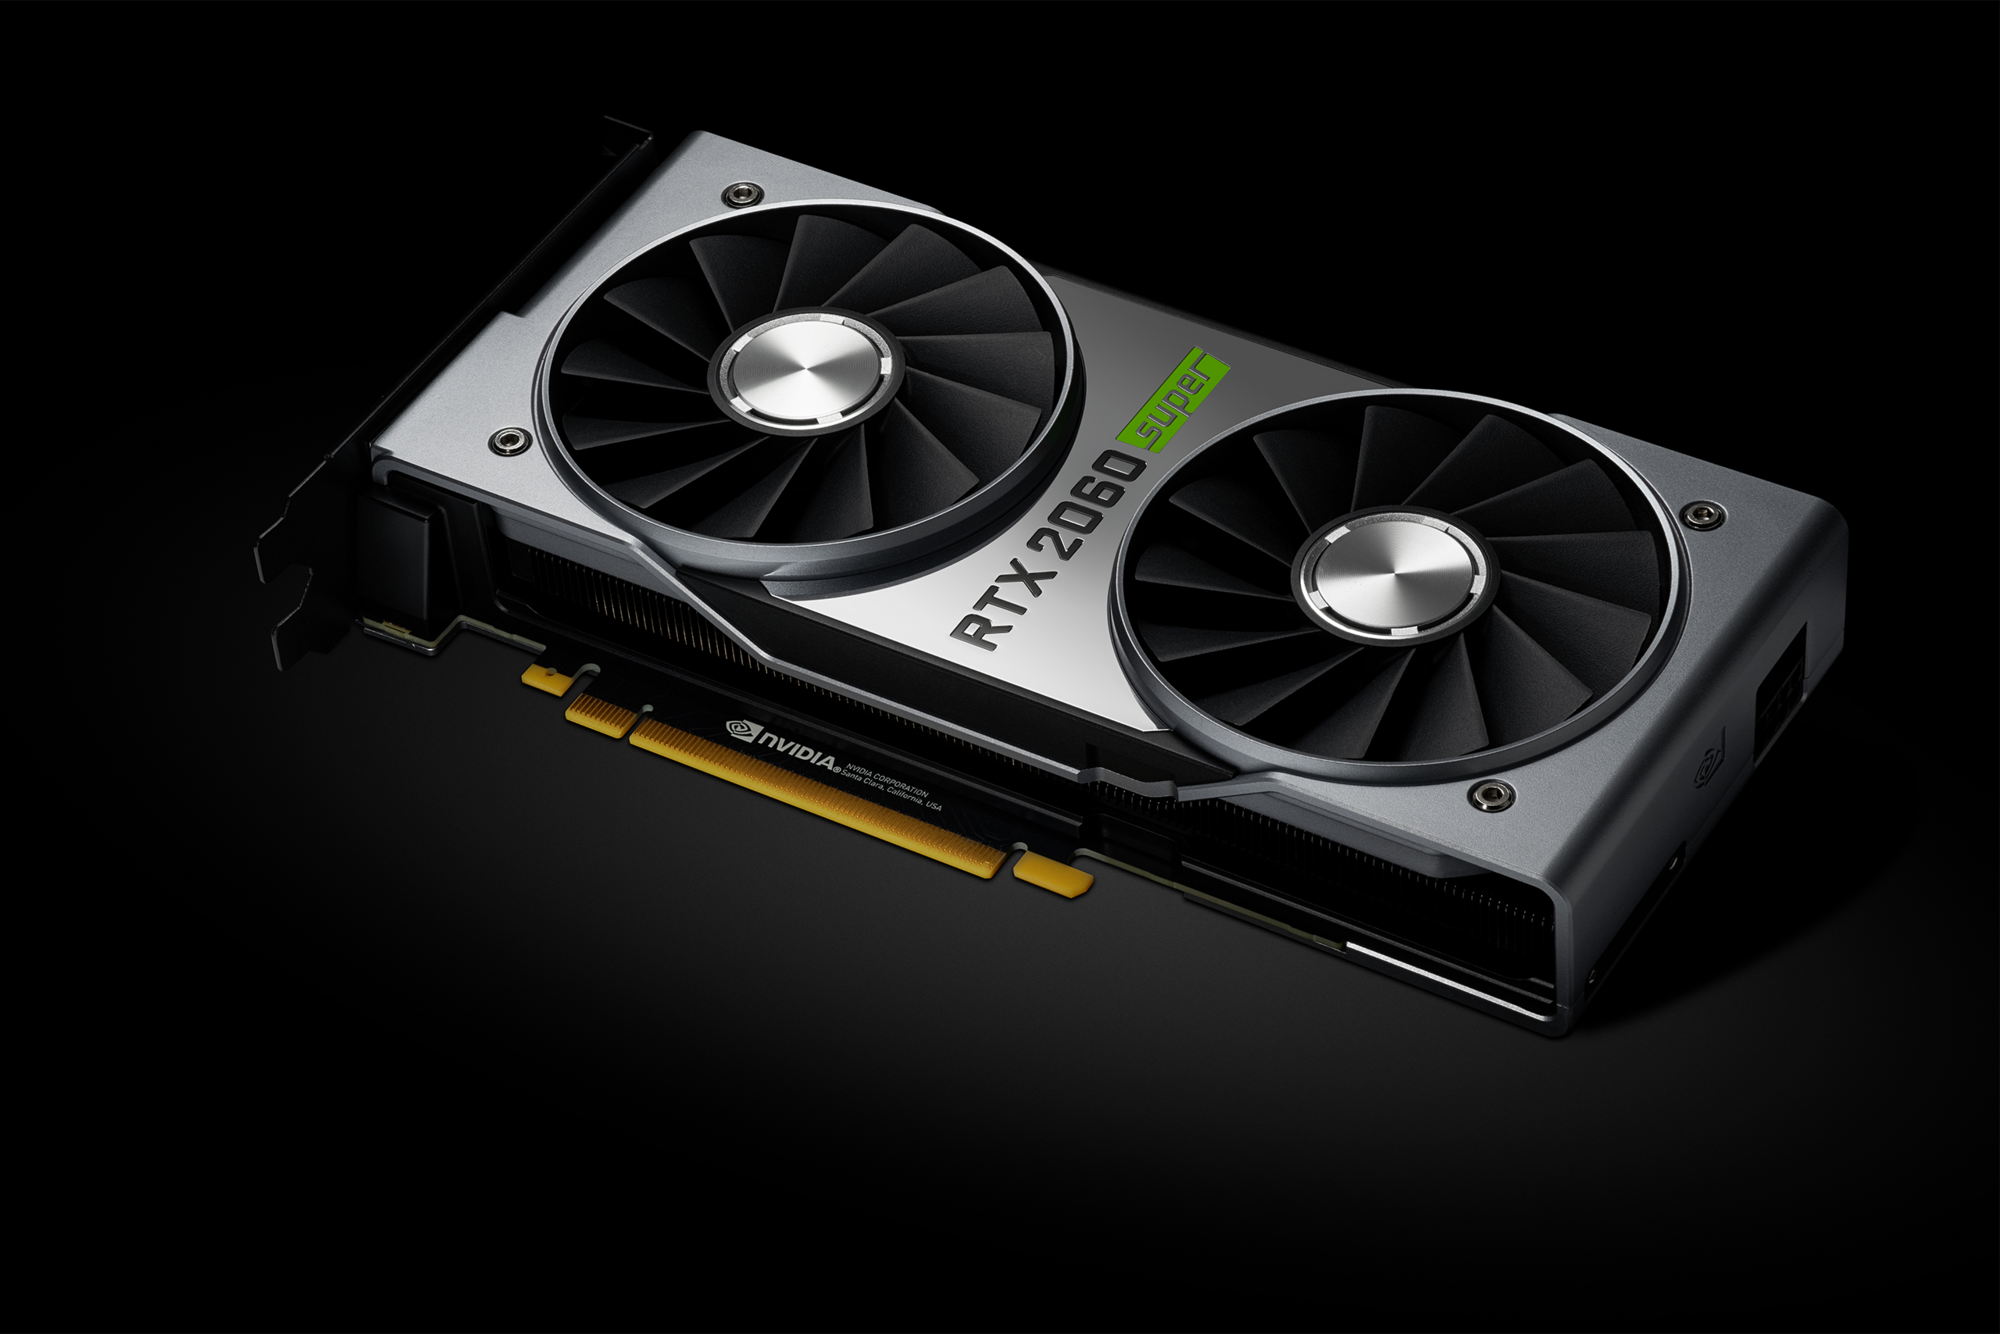 Product photo of an Nvidia RTX 2060 Super graphics card against a dark background